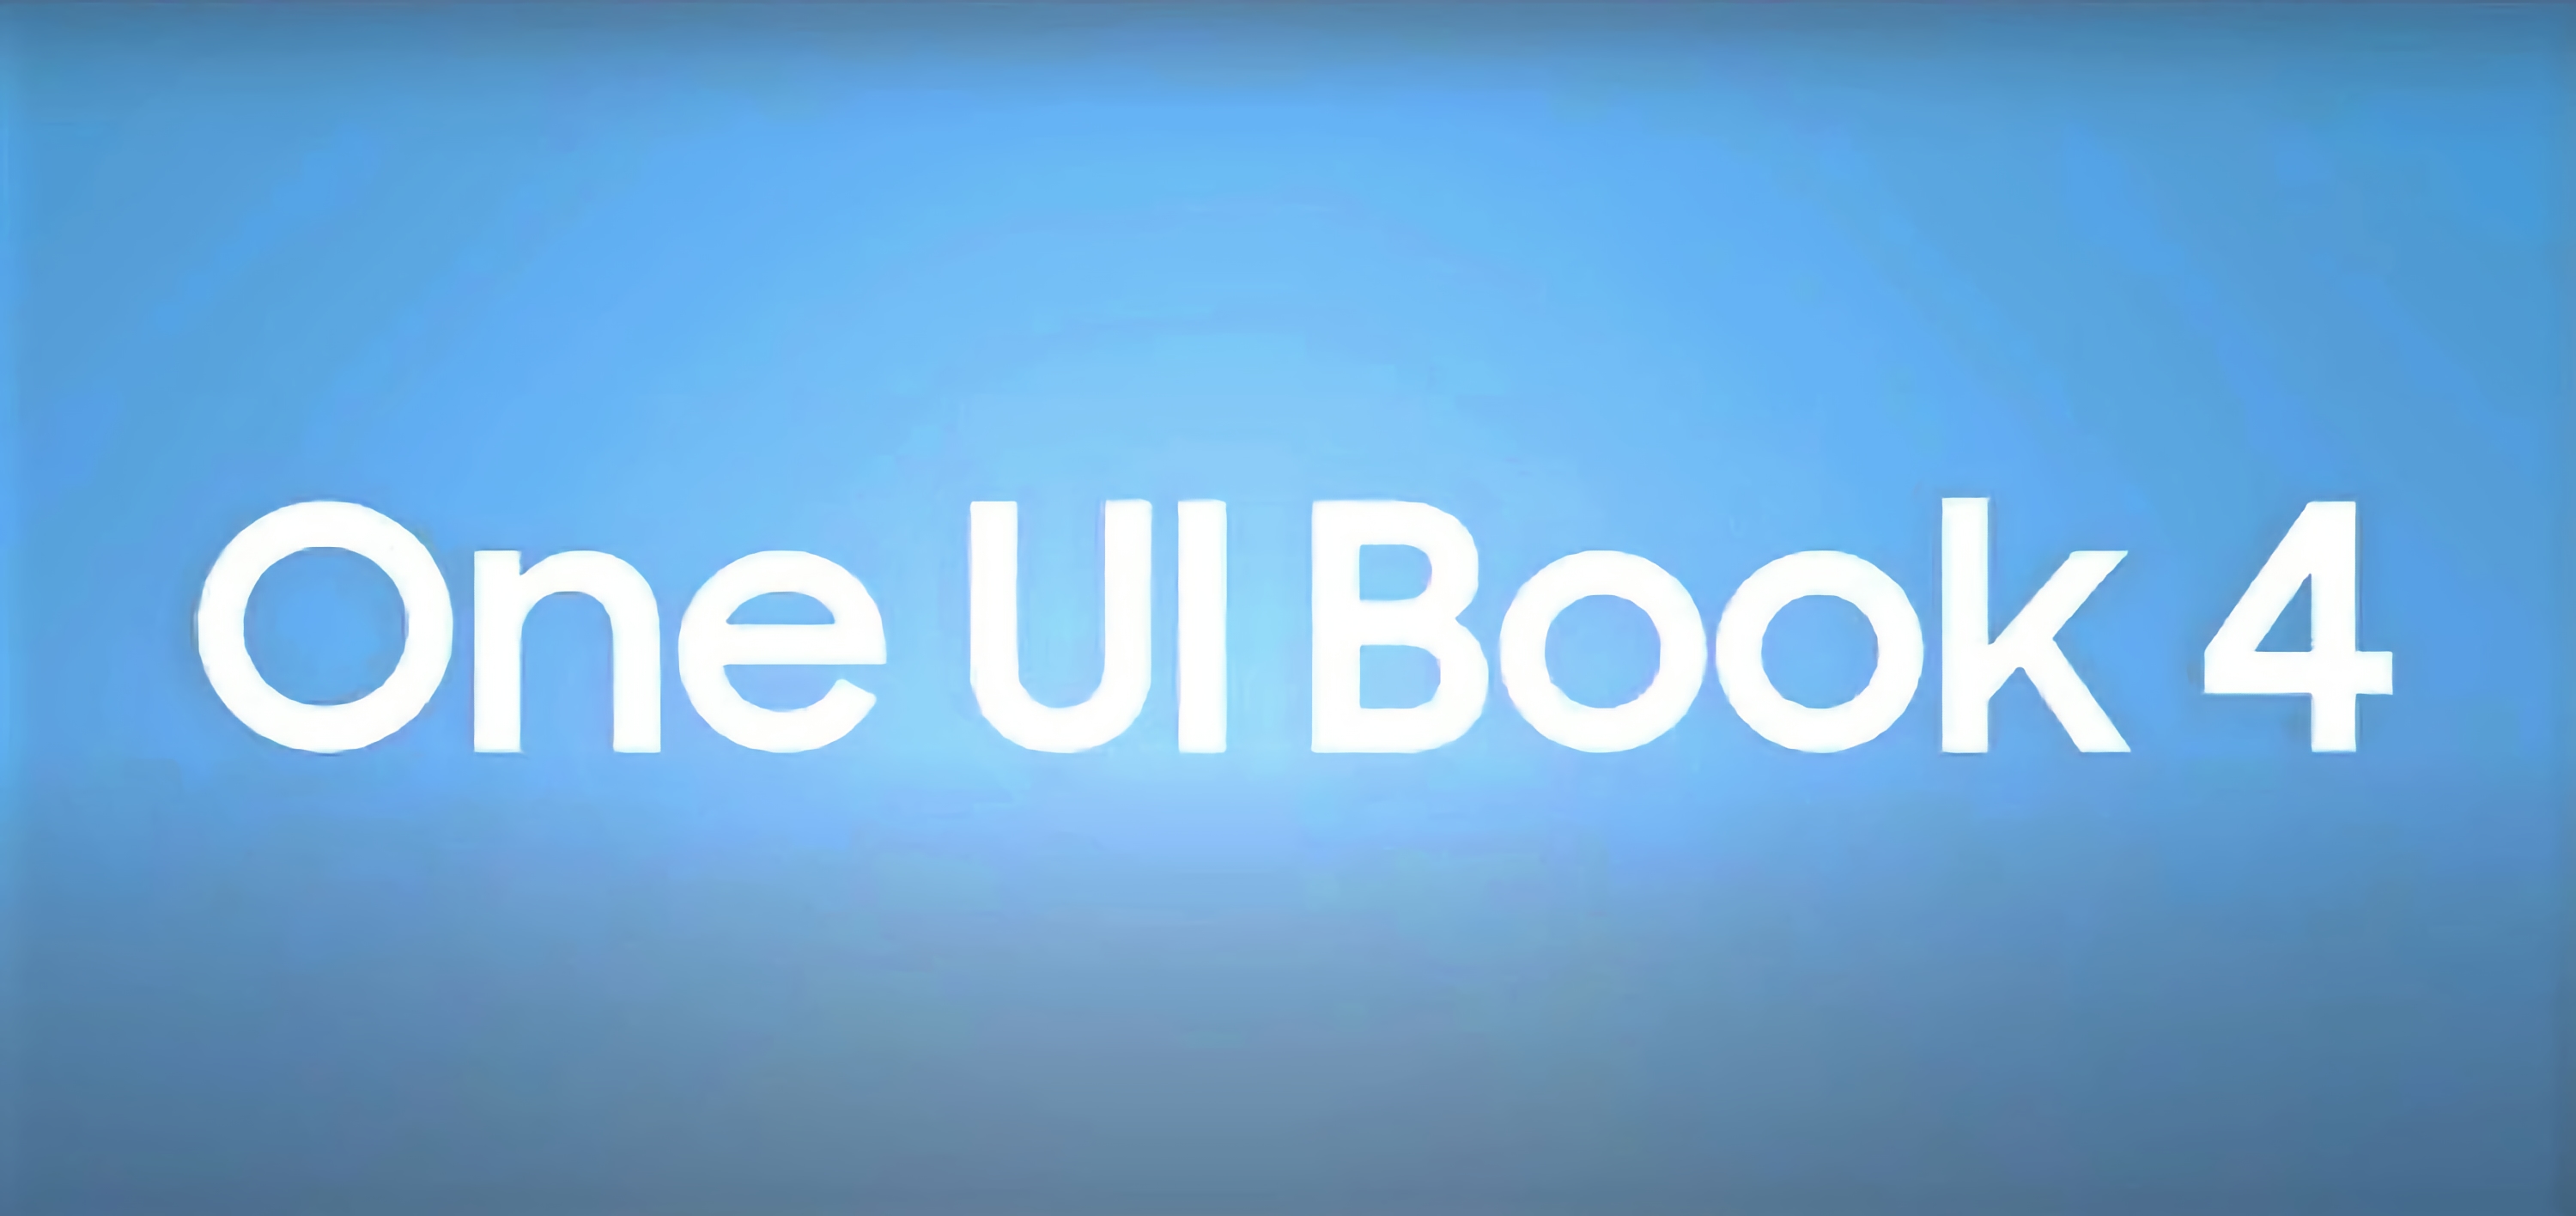 Samsung unveiled One UI Book 4: a branded filmware for Windows laptops